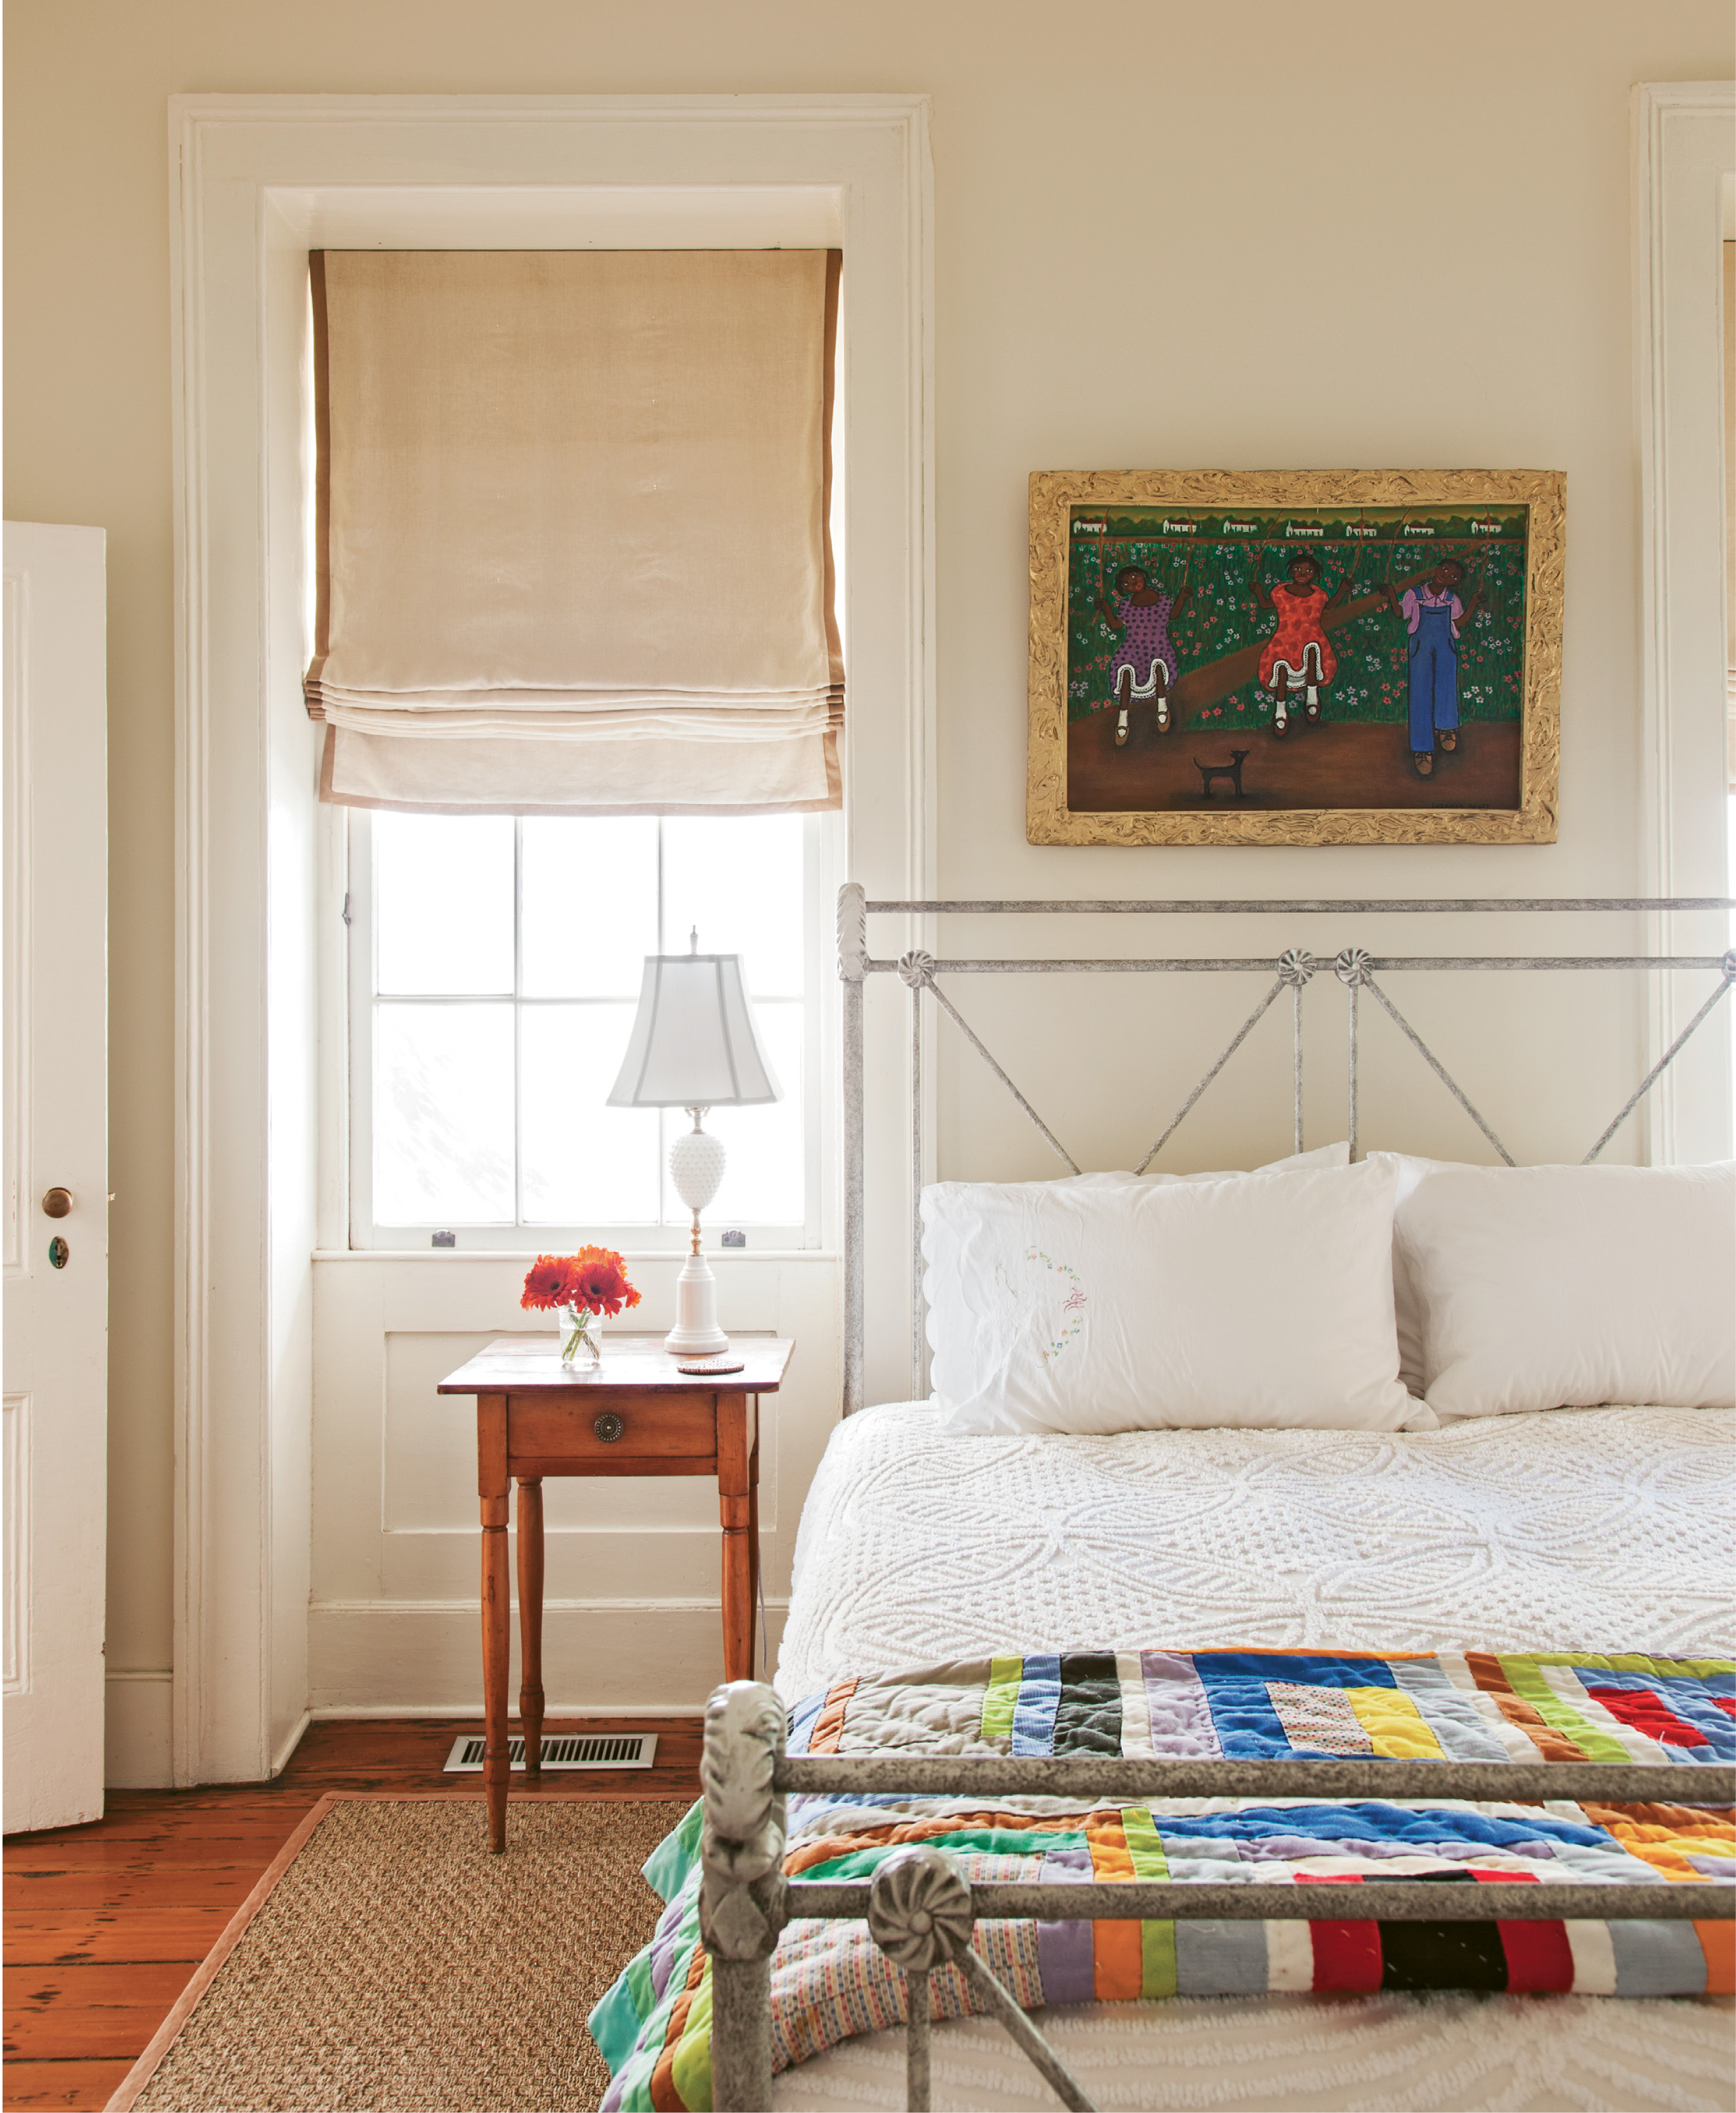 A neutral palette allows the colorful artwork—including a painting by Lorenzo Scott of Atlanta and quilt by Maggie Lou Williams of Bowman, South Carolina—to command visual attention.